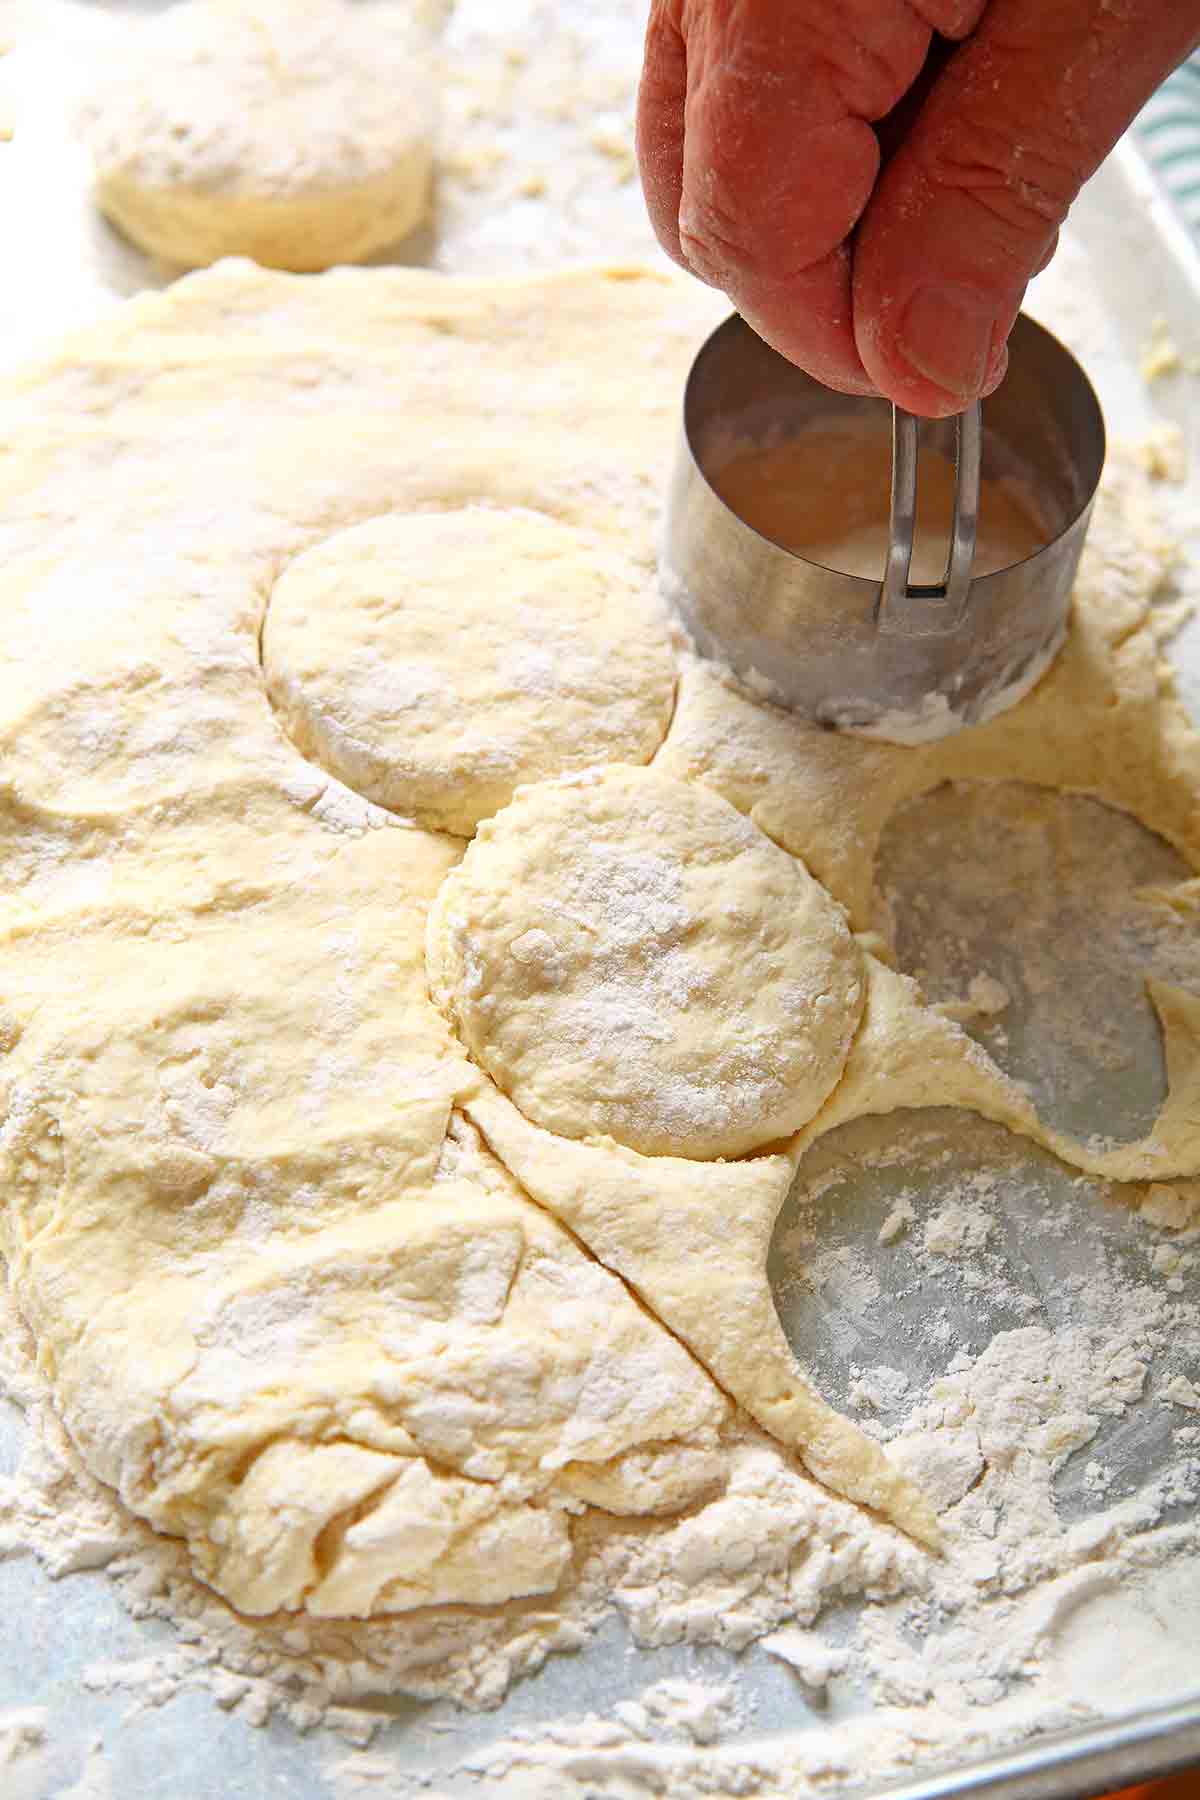 A person using a biscuit cutter to cut out biscuit rounds from dough.